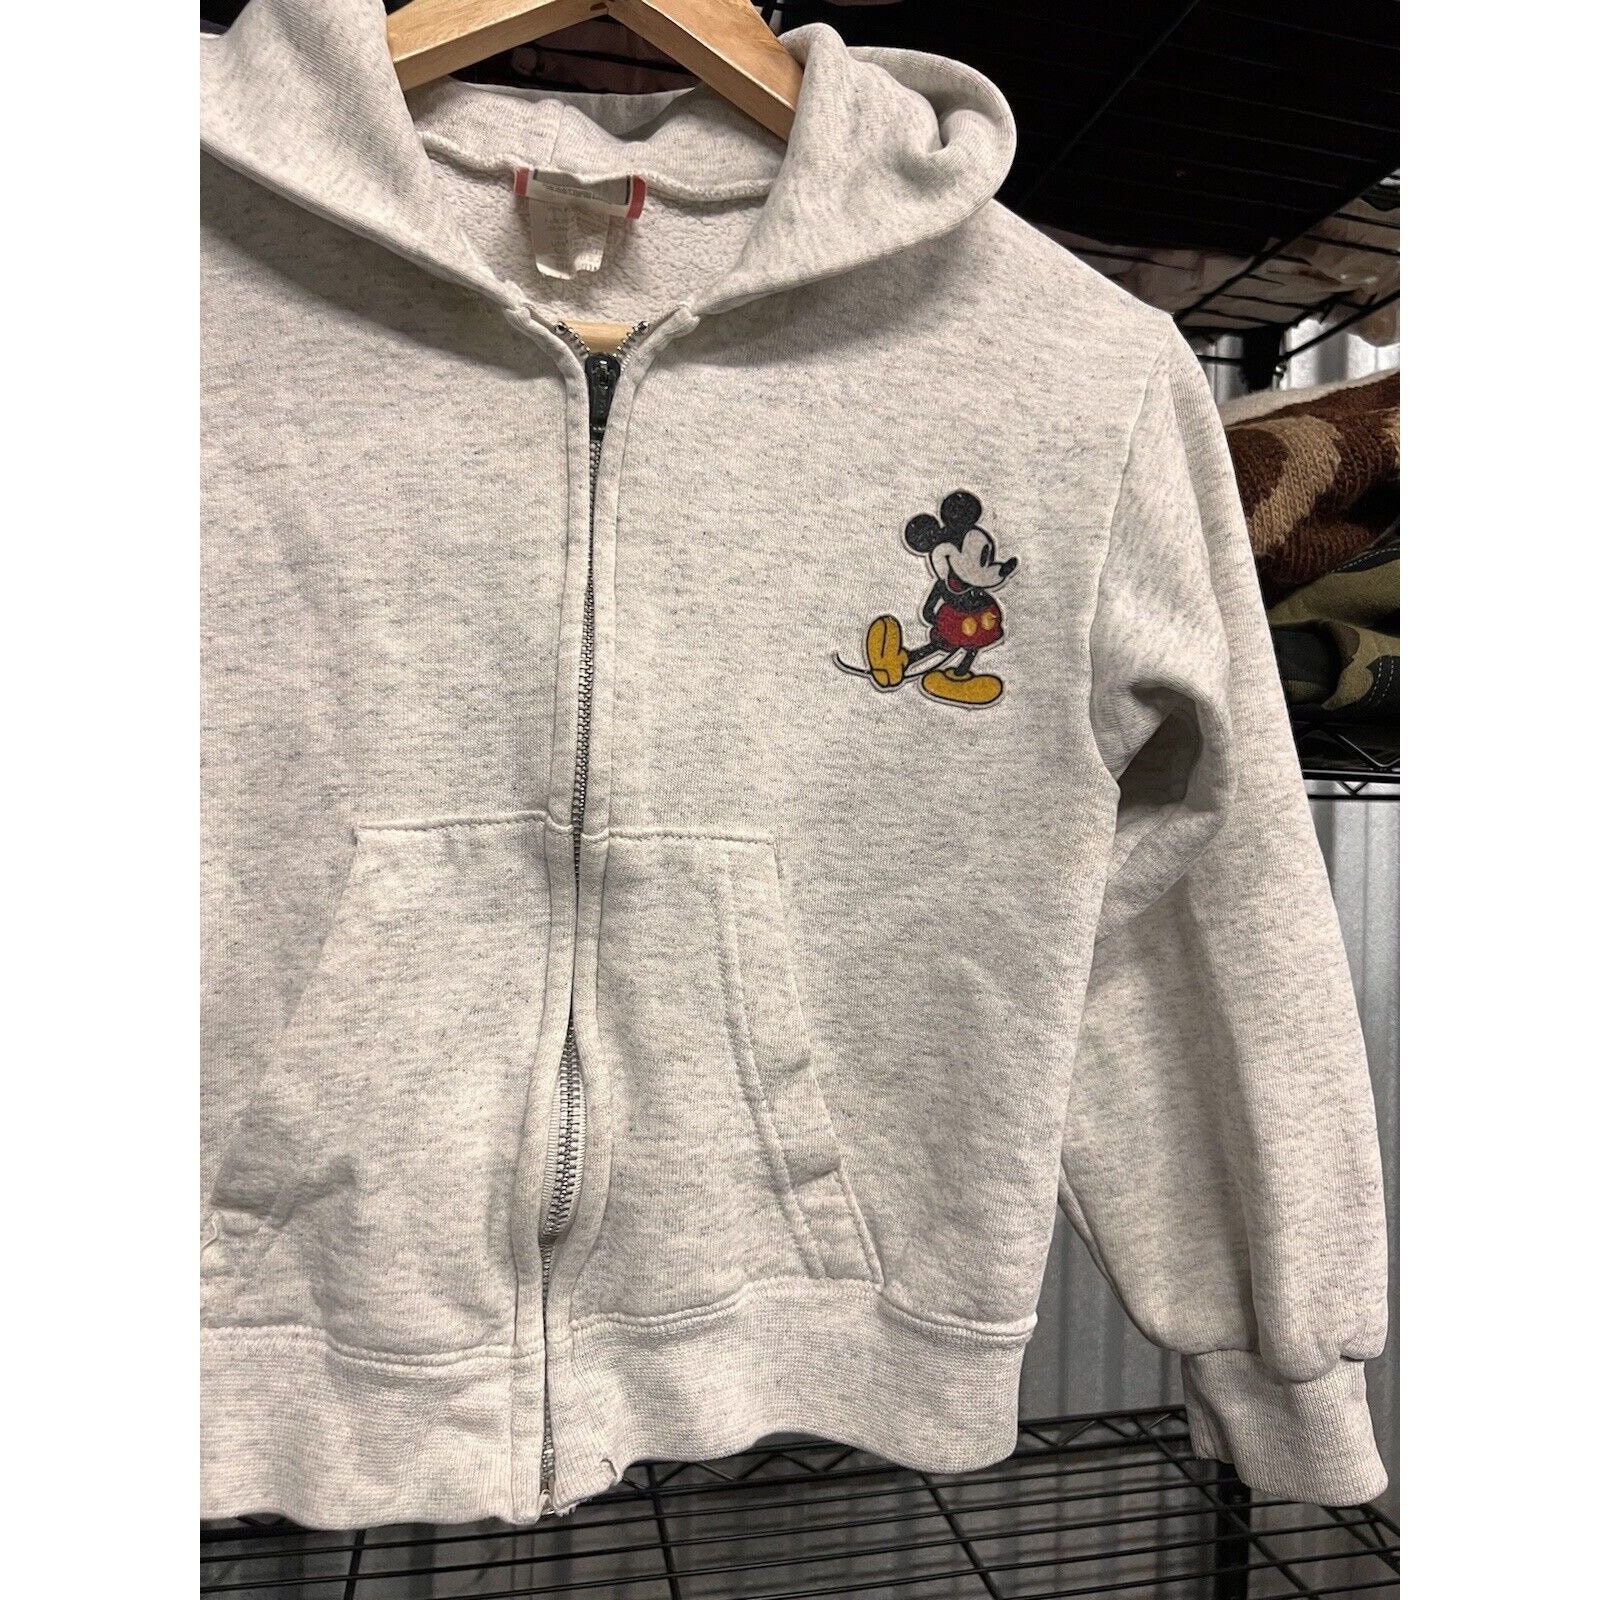 Official Merchandise Pre-School Disney Mickey Smiley Face Boys Crewneck Sweatshirt Boys Birthday Gift Idea Classic Mickey Mouse Kids Top Toddlers Ages 3-10 Childrens Clothes 